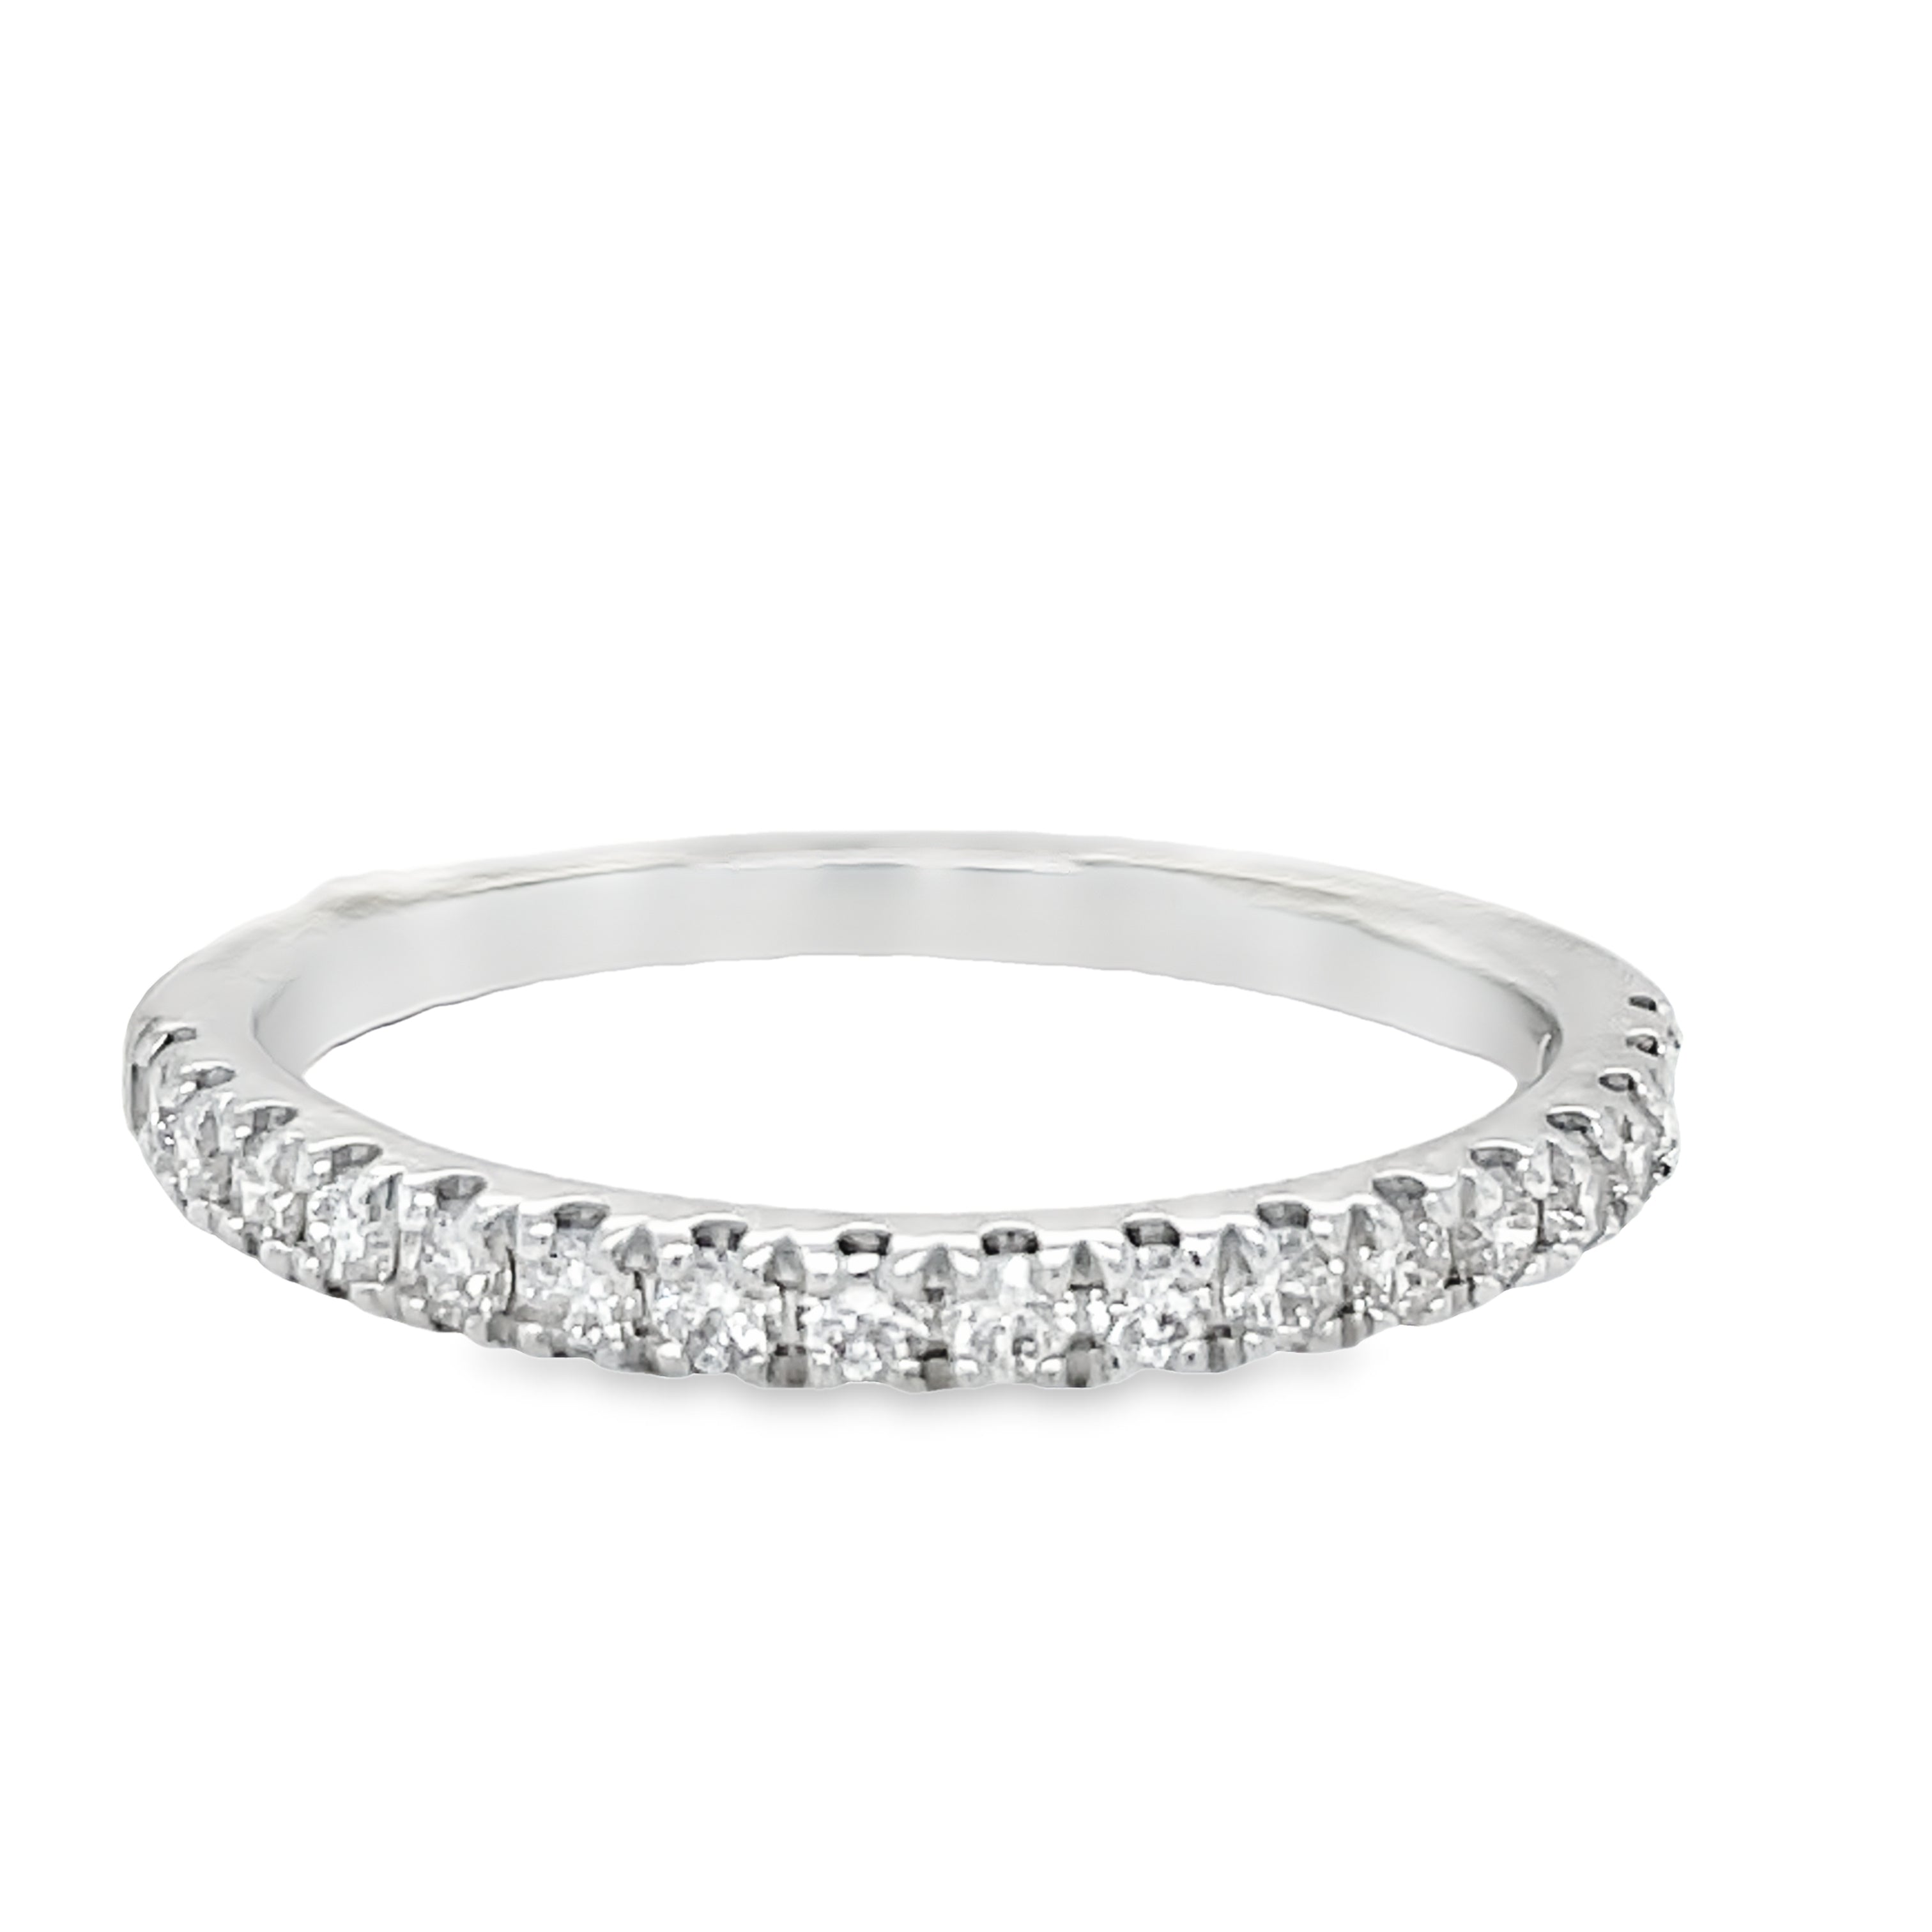 Celebrate an anniversary with this exquisite 0.22 ct diamond ring. Crafted in 14k white gold band, the diamond is set in a prong setting for maximum sparkle. Guaranteed to impress.